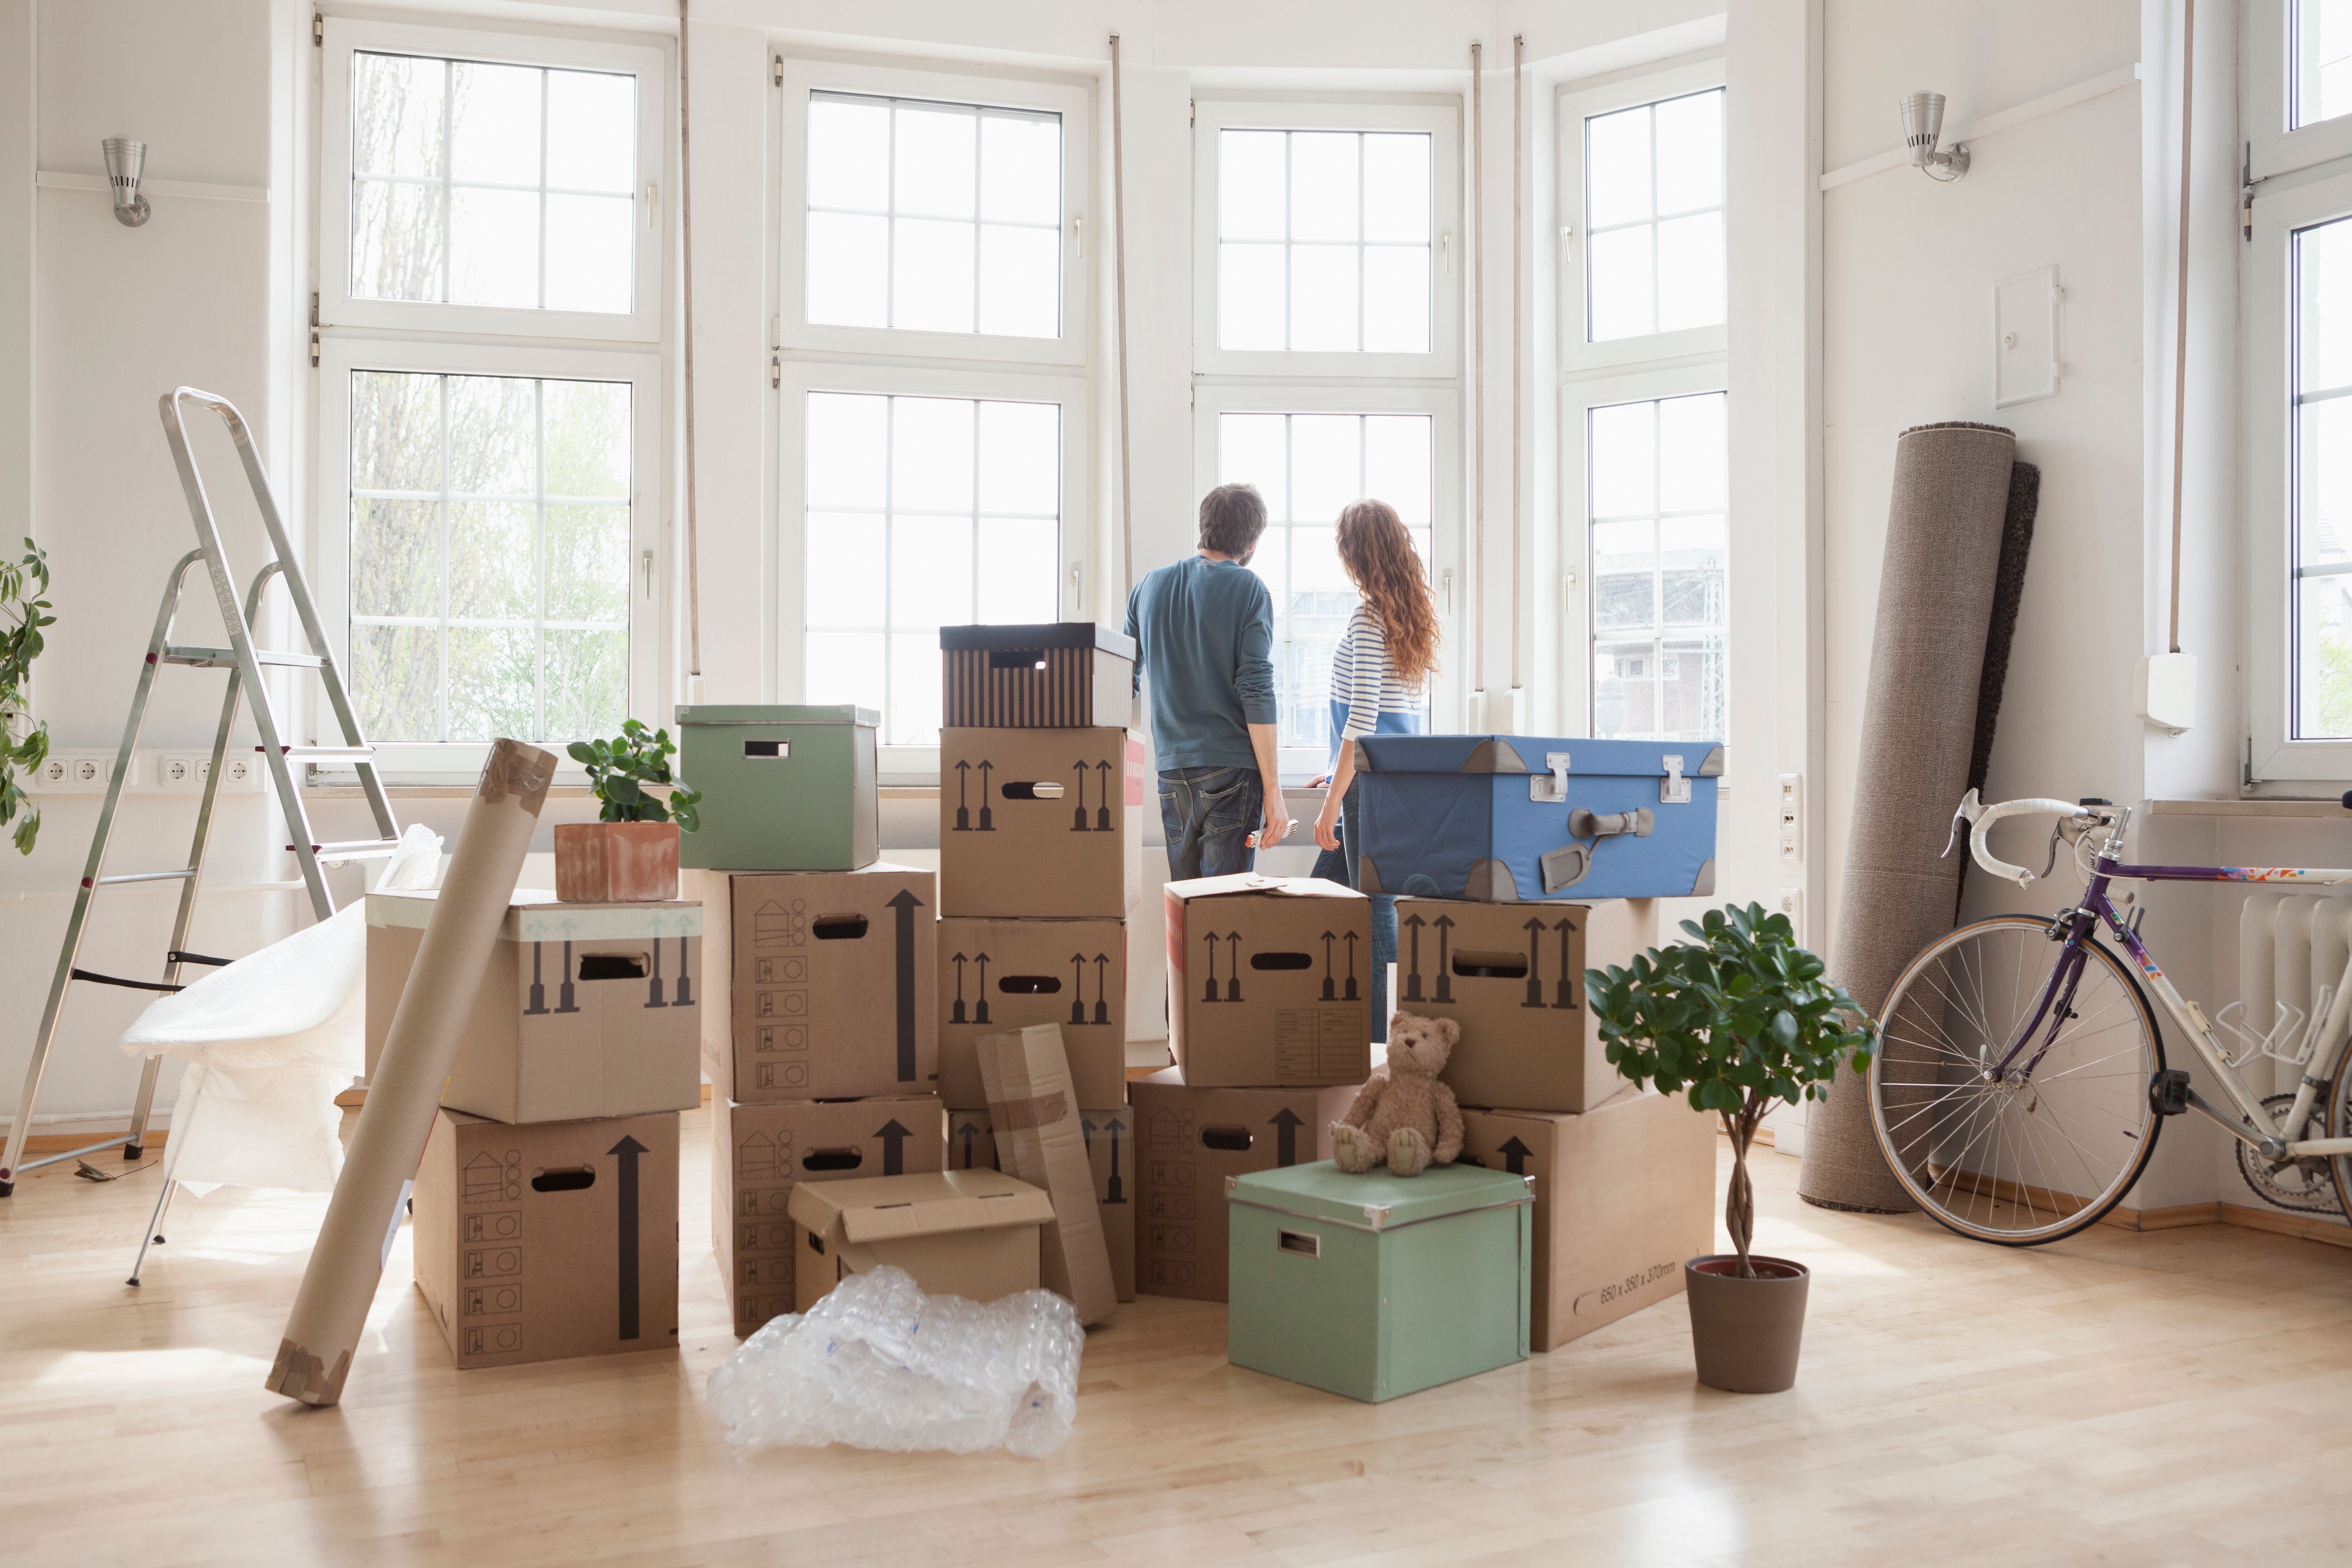 A couple and several boxes in a room. | Source: Getty Images